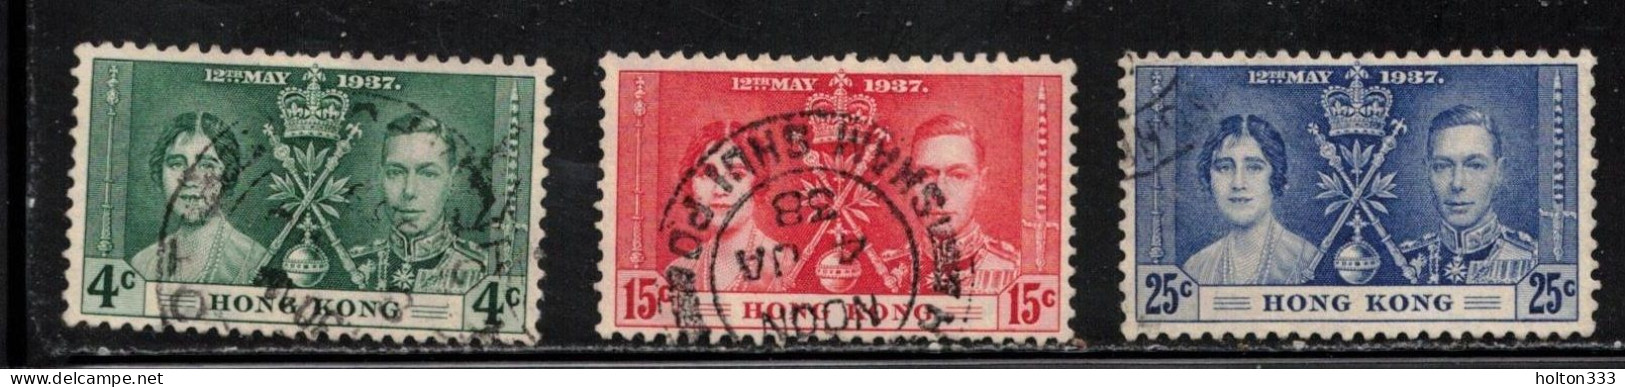 HONG KONG Scott # 151-3 Used - KGVI Coronation Issue - Used Stamps